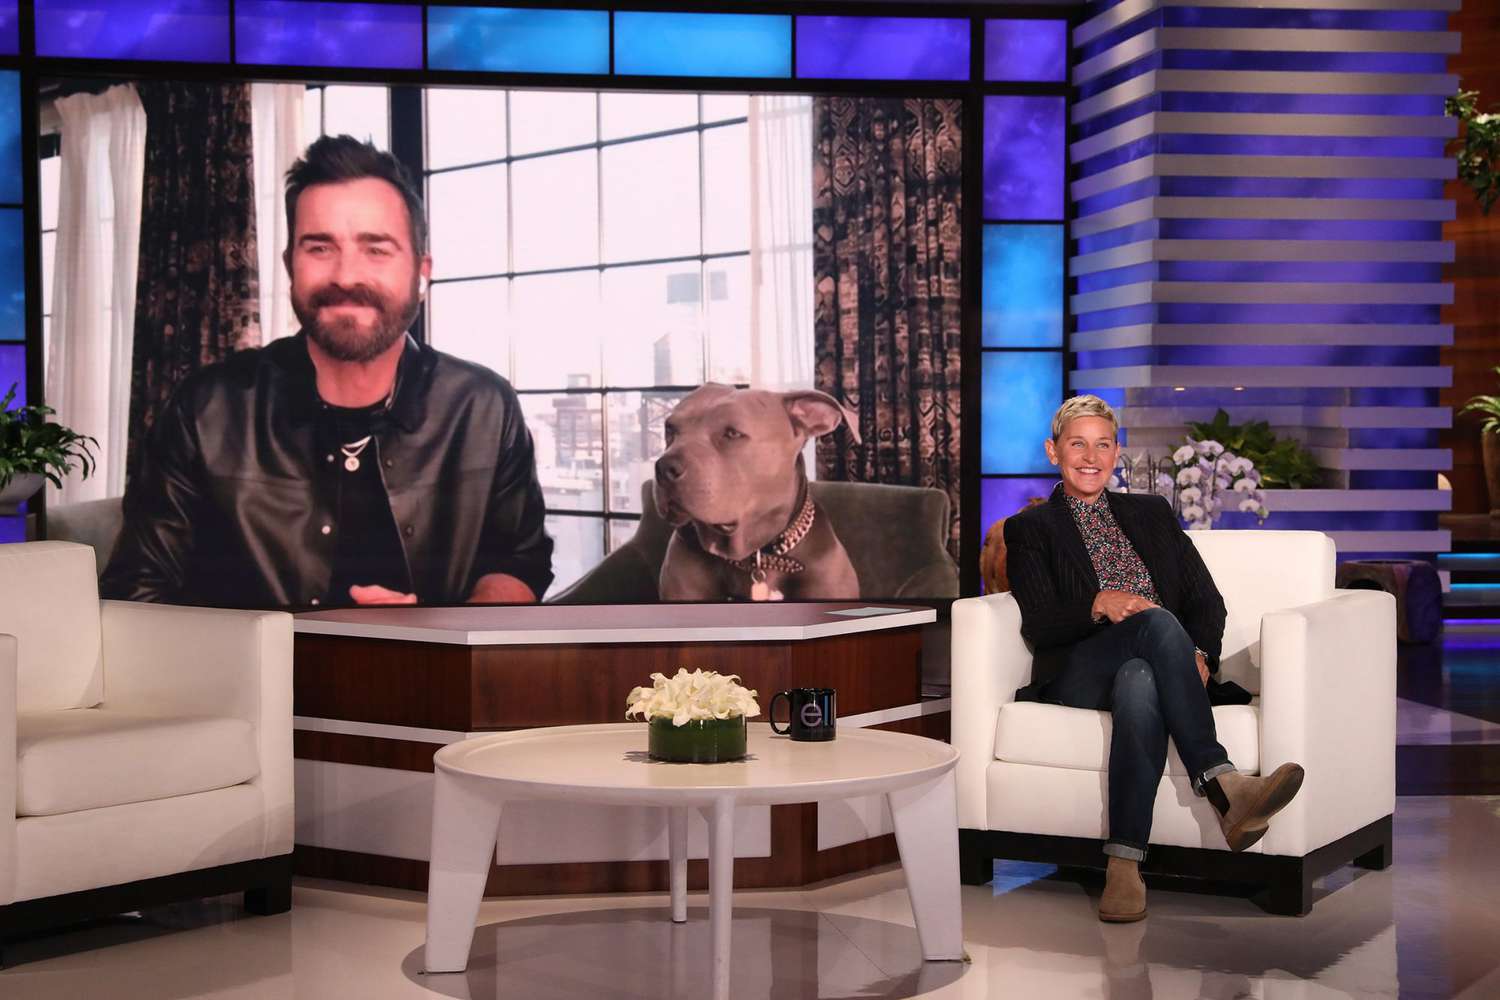 “The Mosquito Coast” star Justin Theroux makes an appearance on “The Ellen DeGeneres Show” via video chat airing Monday, May 3rd.